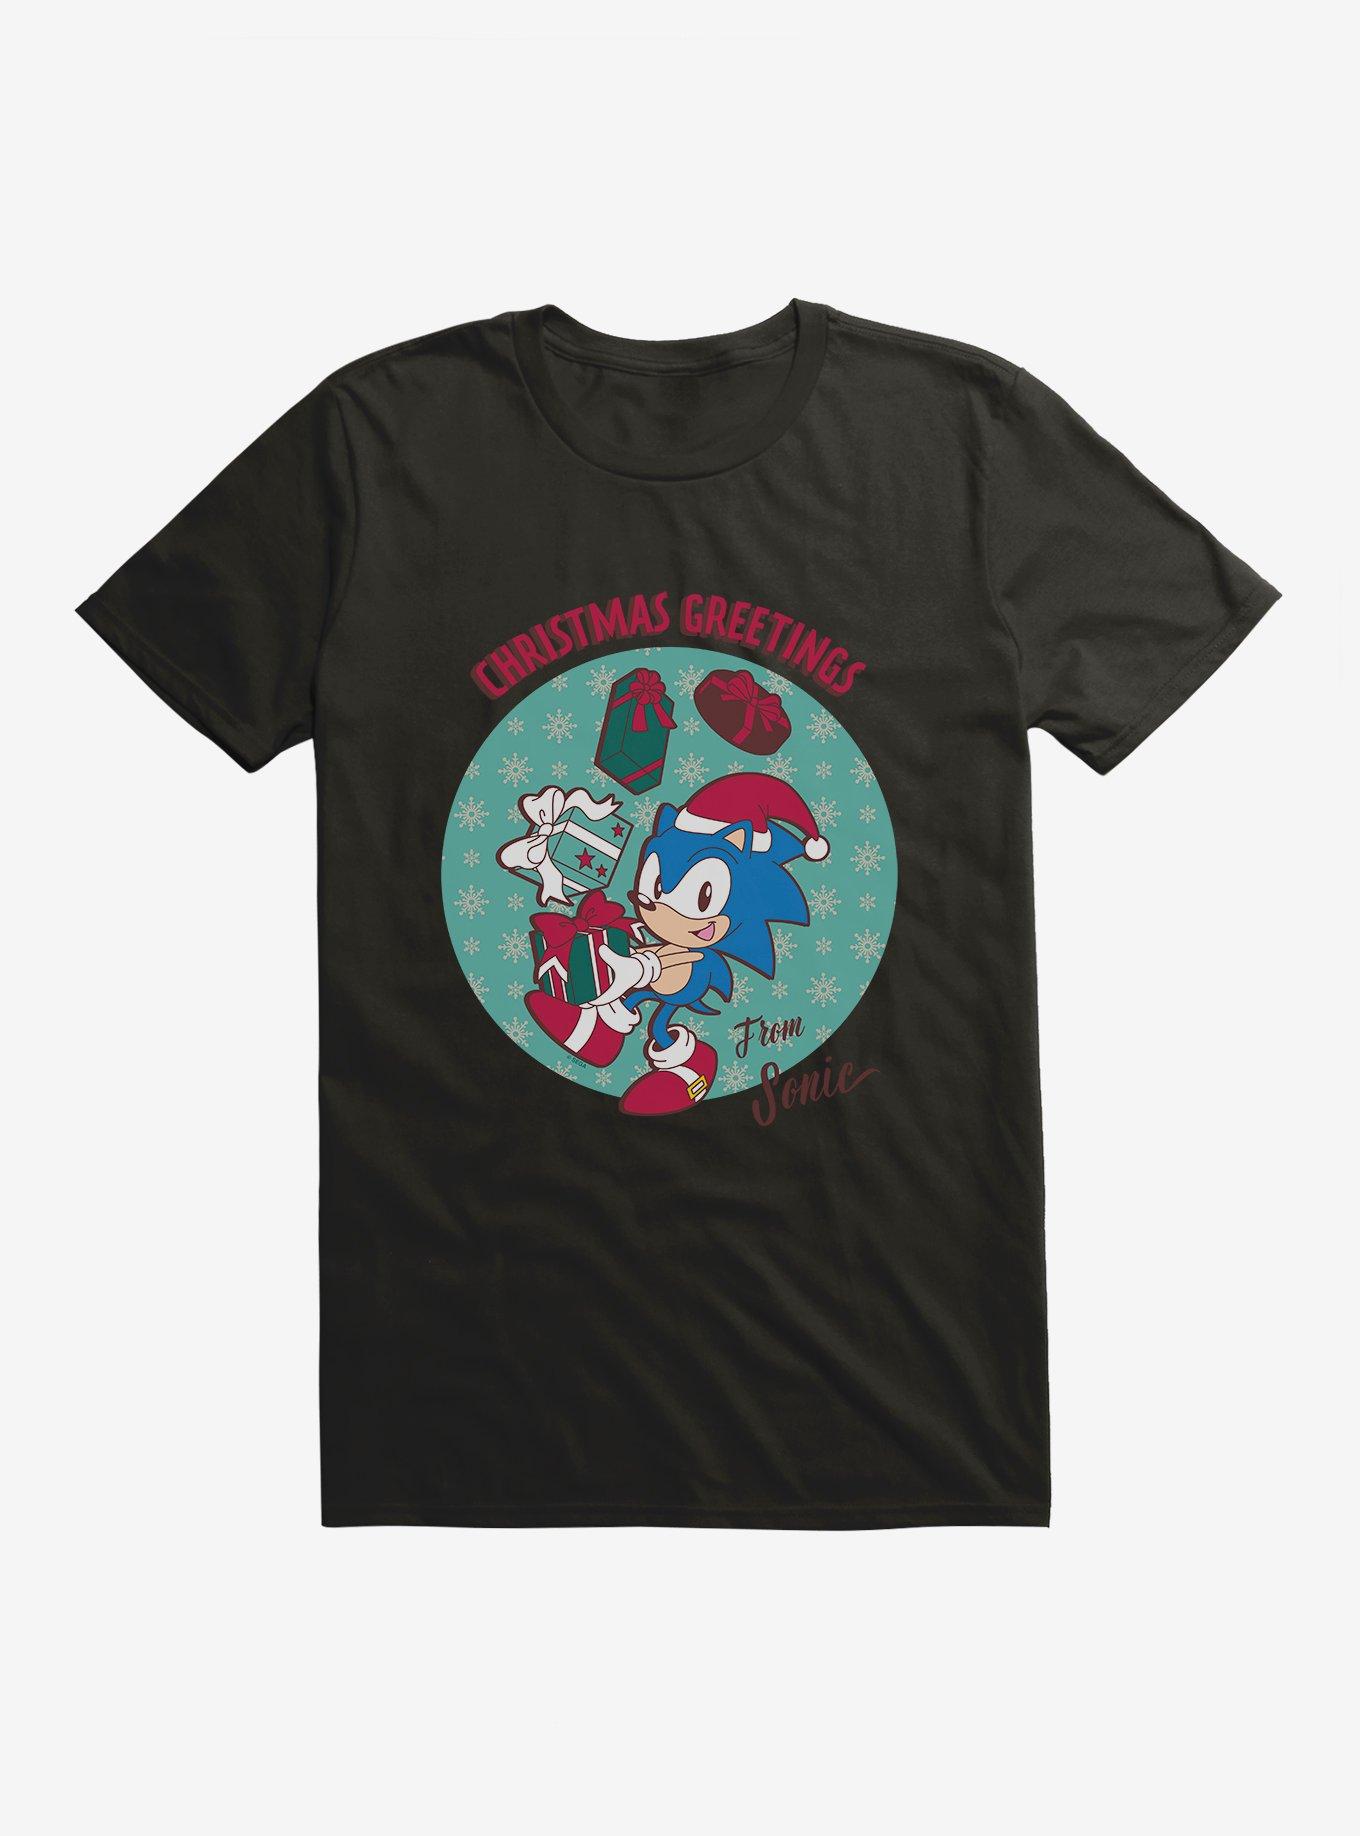 Sonic The Hedgehog Christmas Greetings From T-Shirt